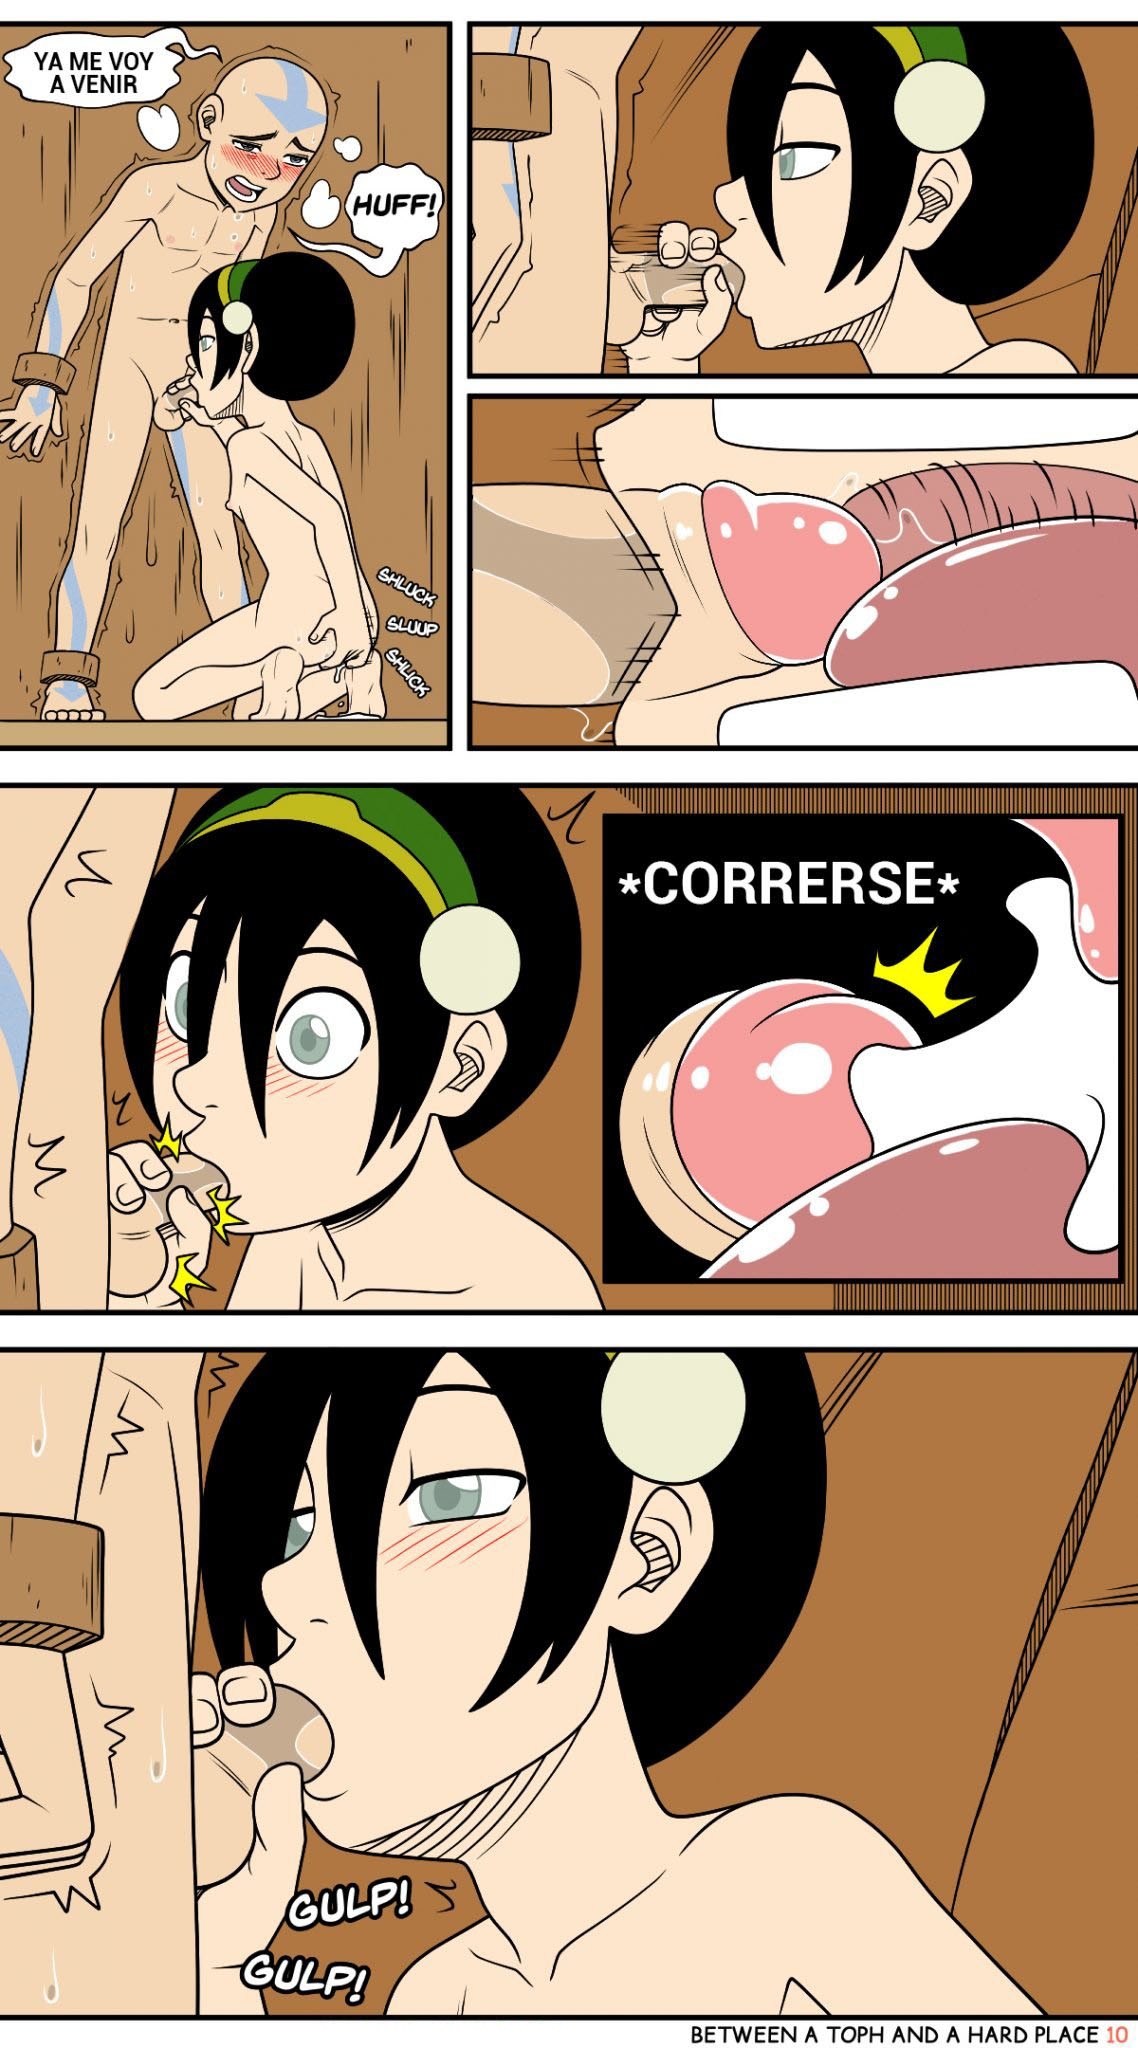 BETWEEN a TOPH and a Hard Place